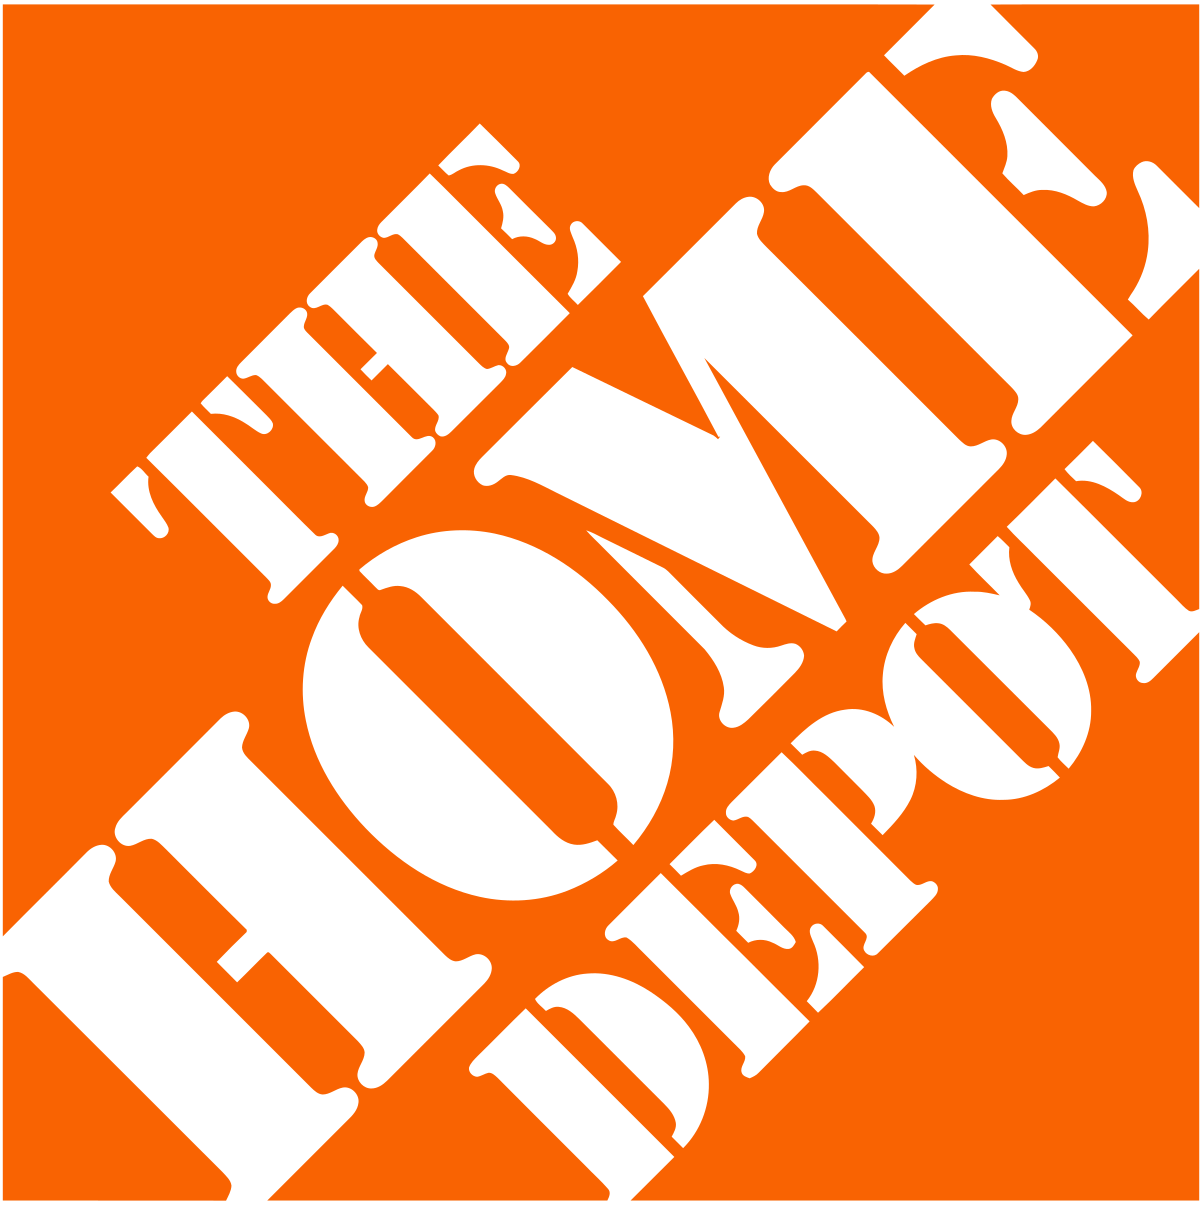 1200px-TheHomeDepot.svg